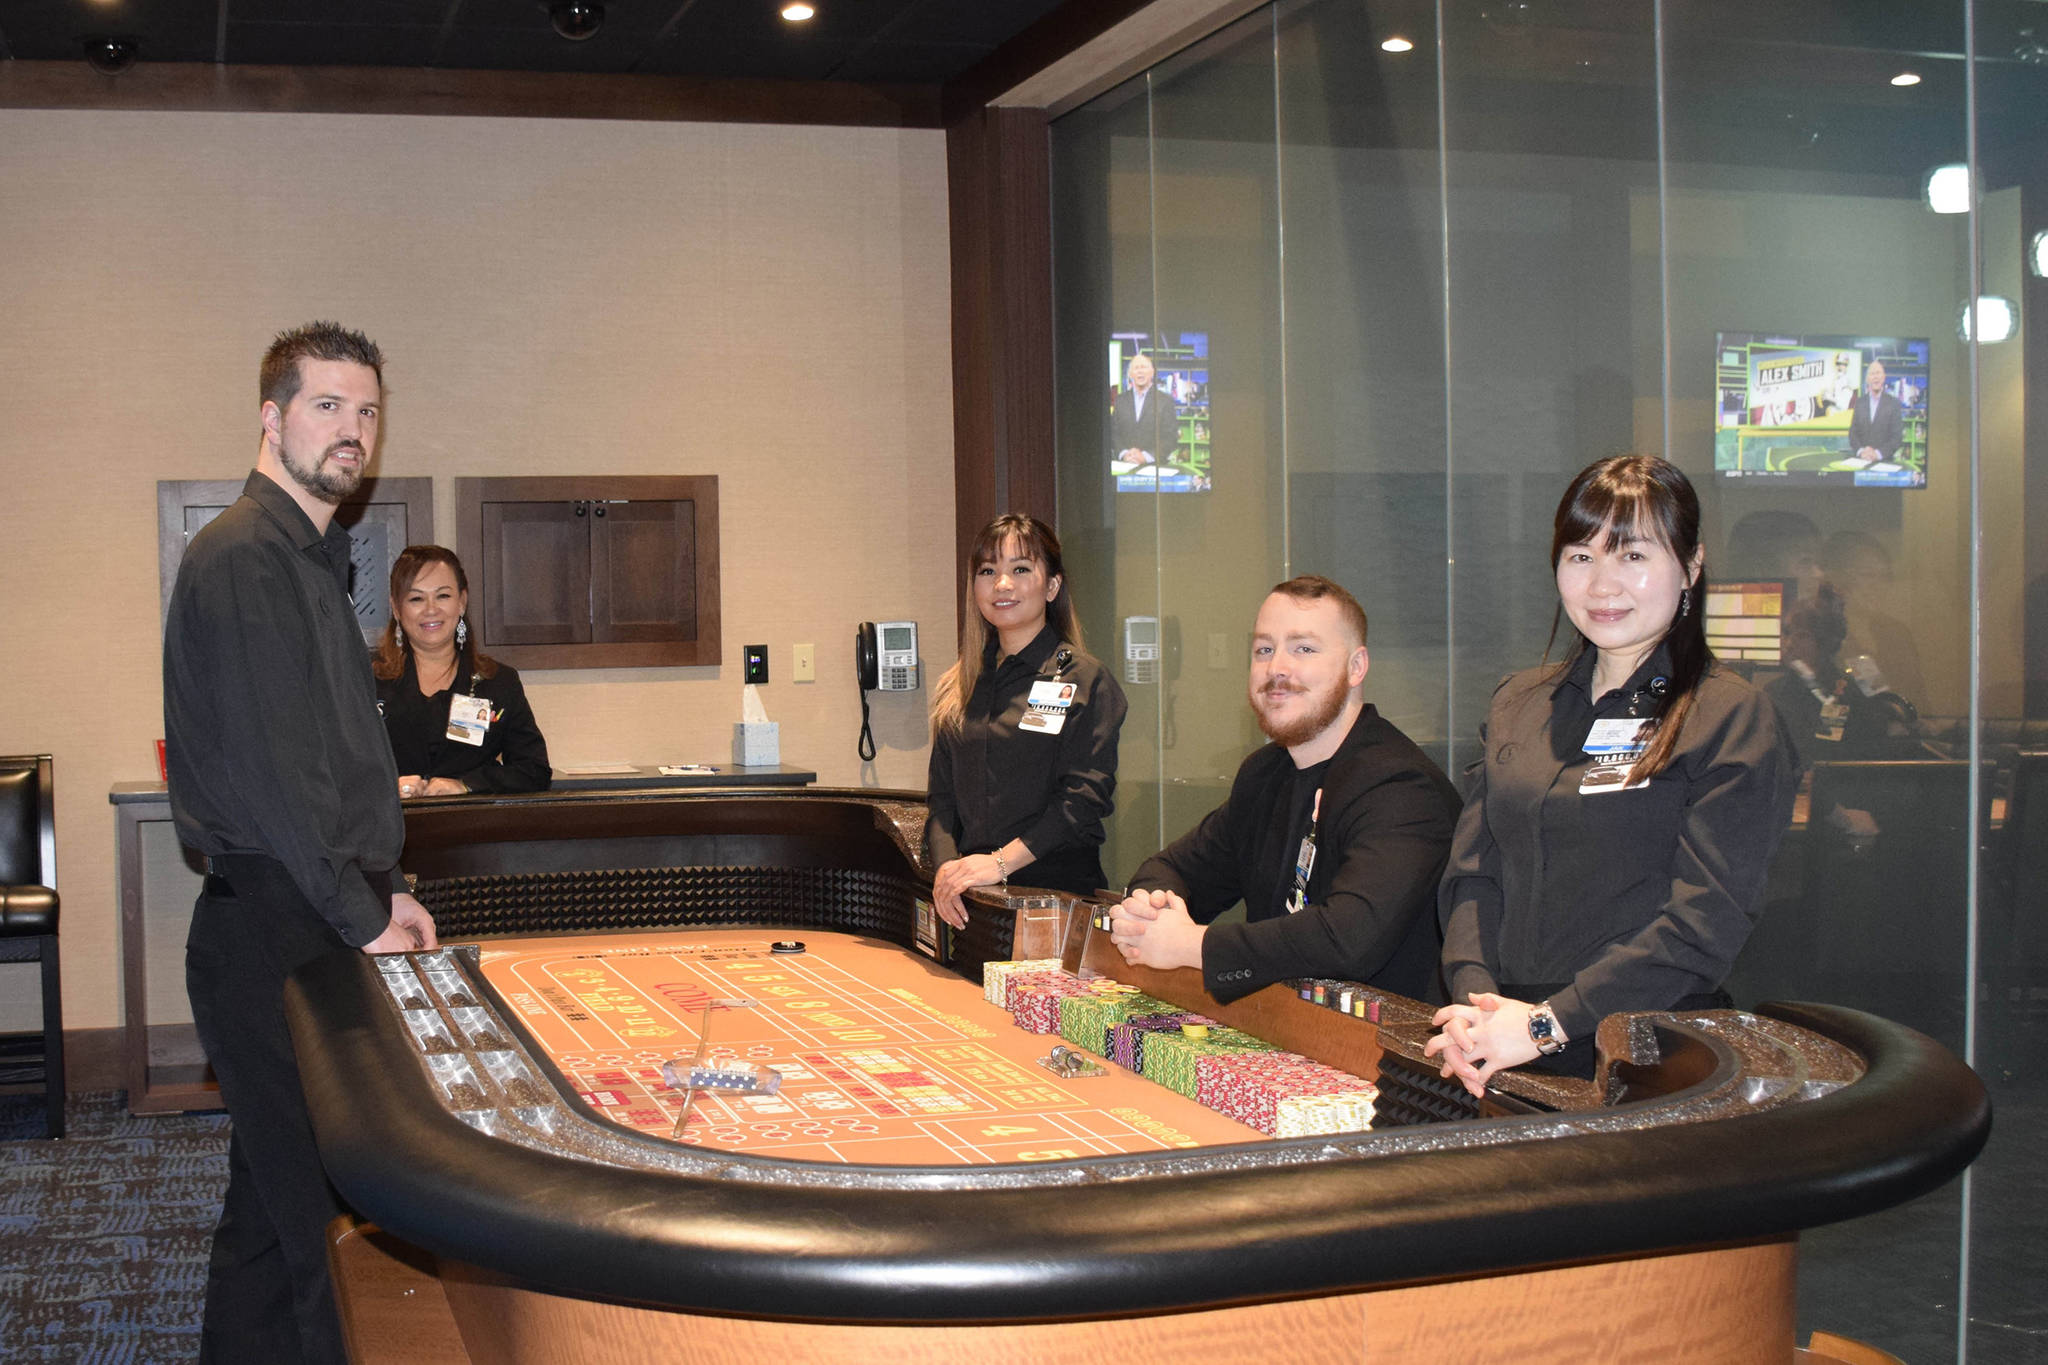 Snoqualmie Casino staff members surround a gaming table in the new private gaming room at Snoqualmie Casino. Photo courtesy of Tarah Smigun                                Snoqualmie Casino staff members (from left) Trevor House, Linda Yem, Sophorn Seng, Ross Garmon and Jan Wu surround a gaming table in the new private gaming room at Snoqualmie Casino. Photo courtesy of Tarah Smigun